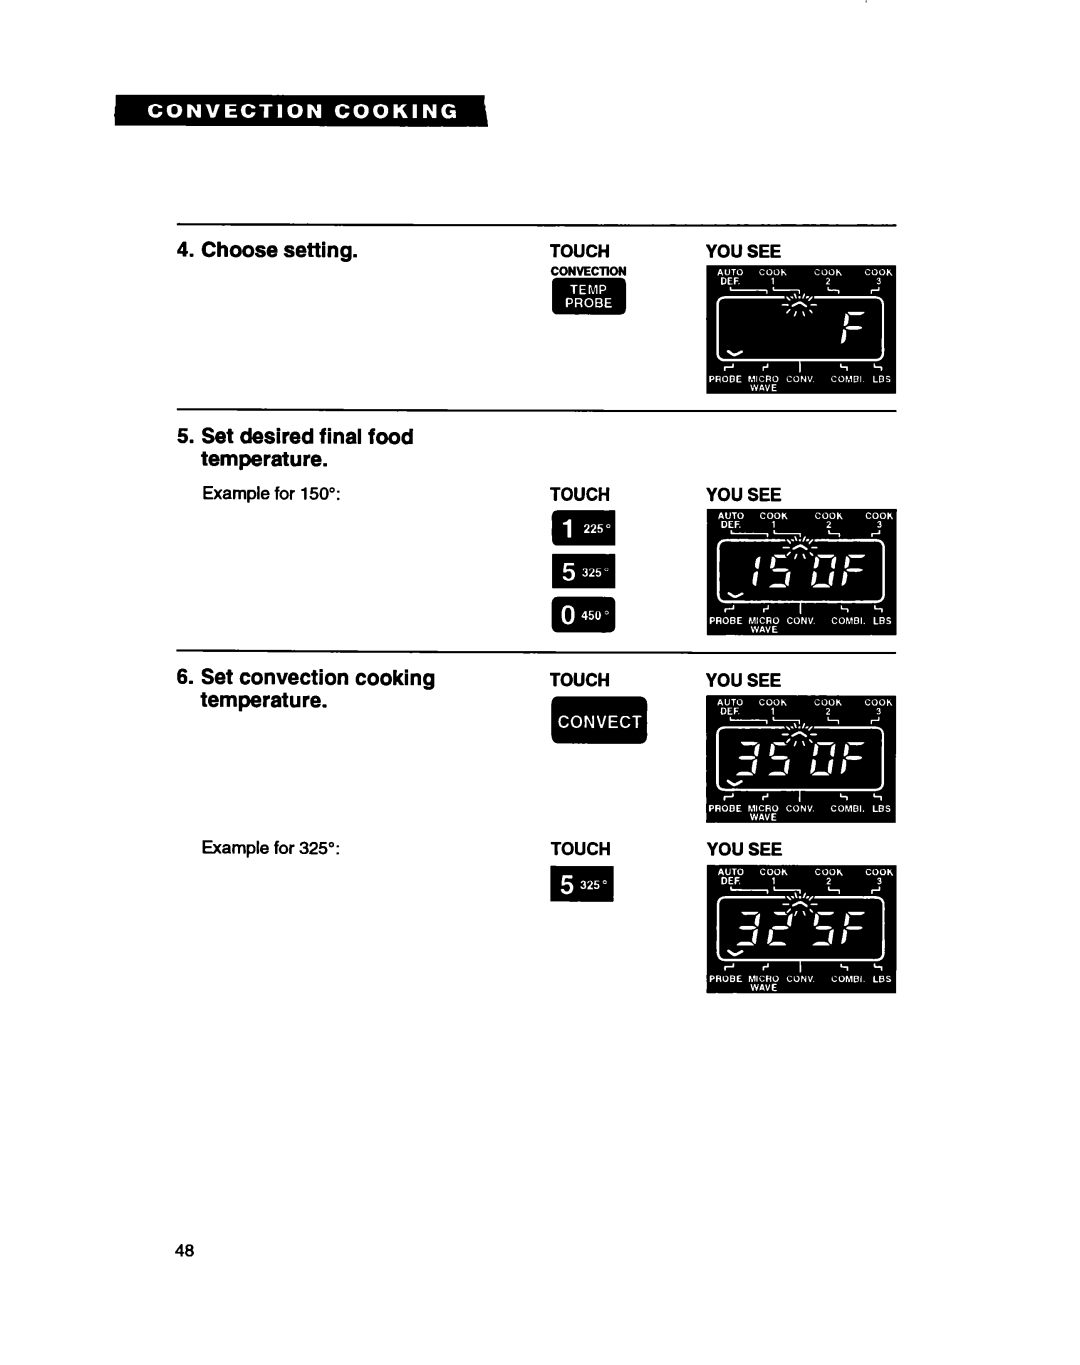 Whirlpool MC8130XA warranty Set desired final food temperature, Set convection cooking temperature, Choose setting, Touch 